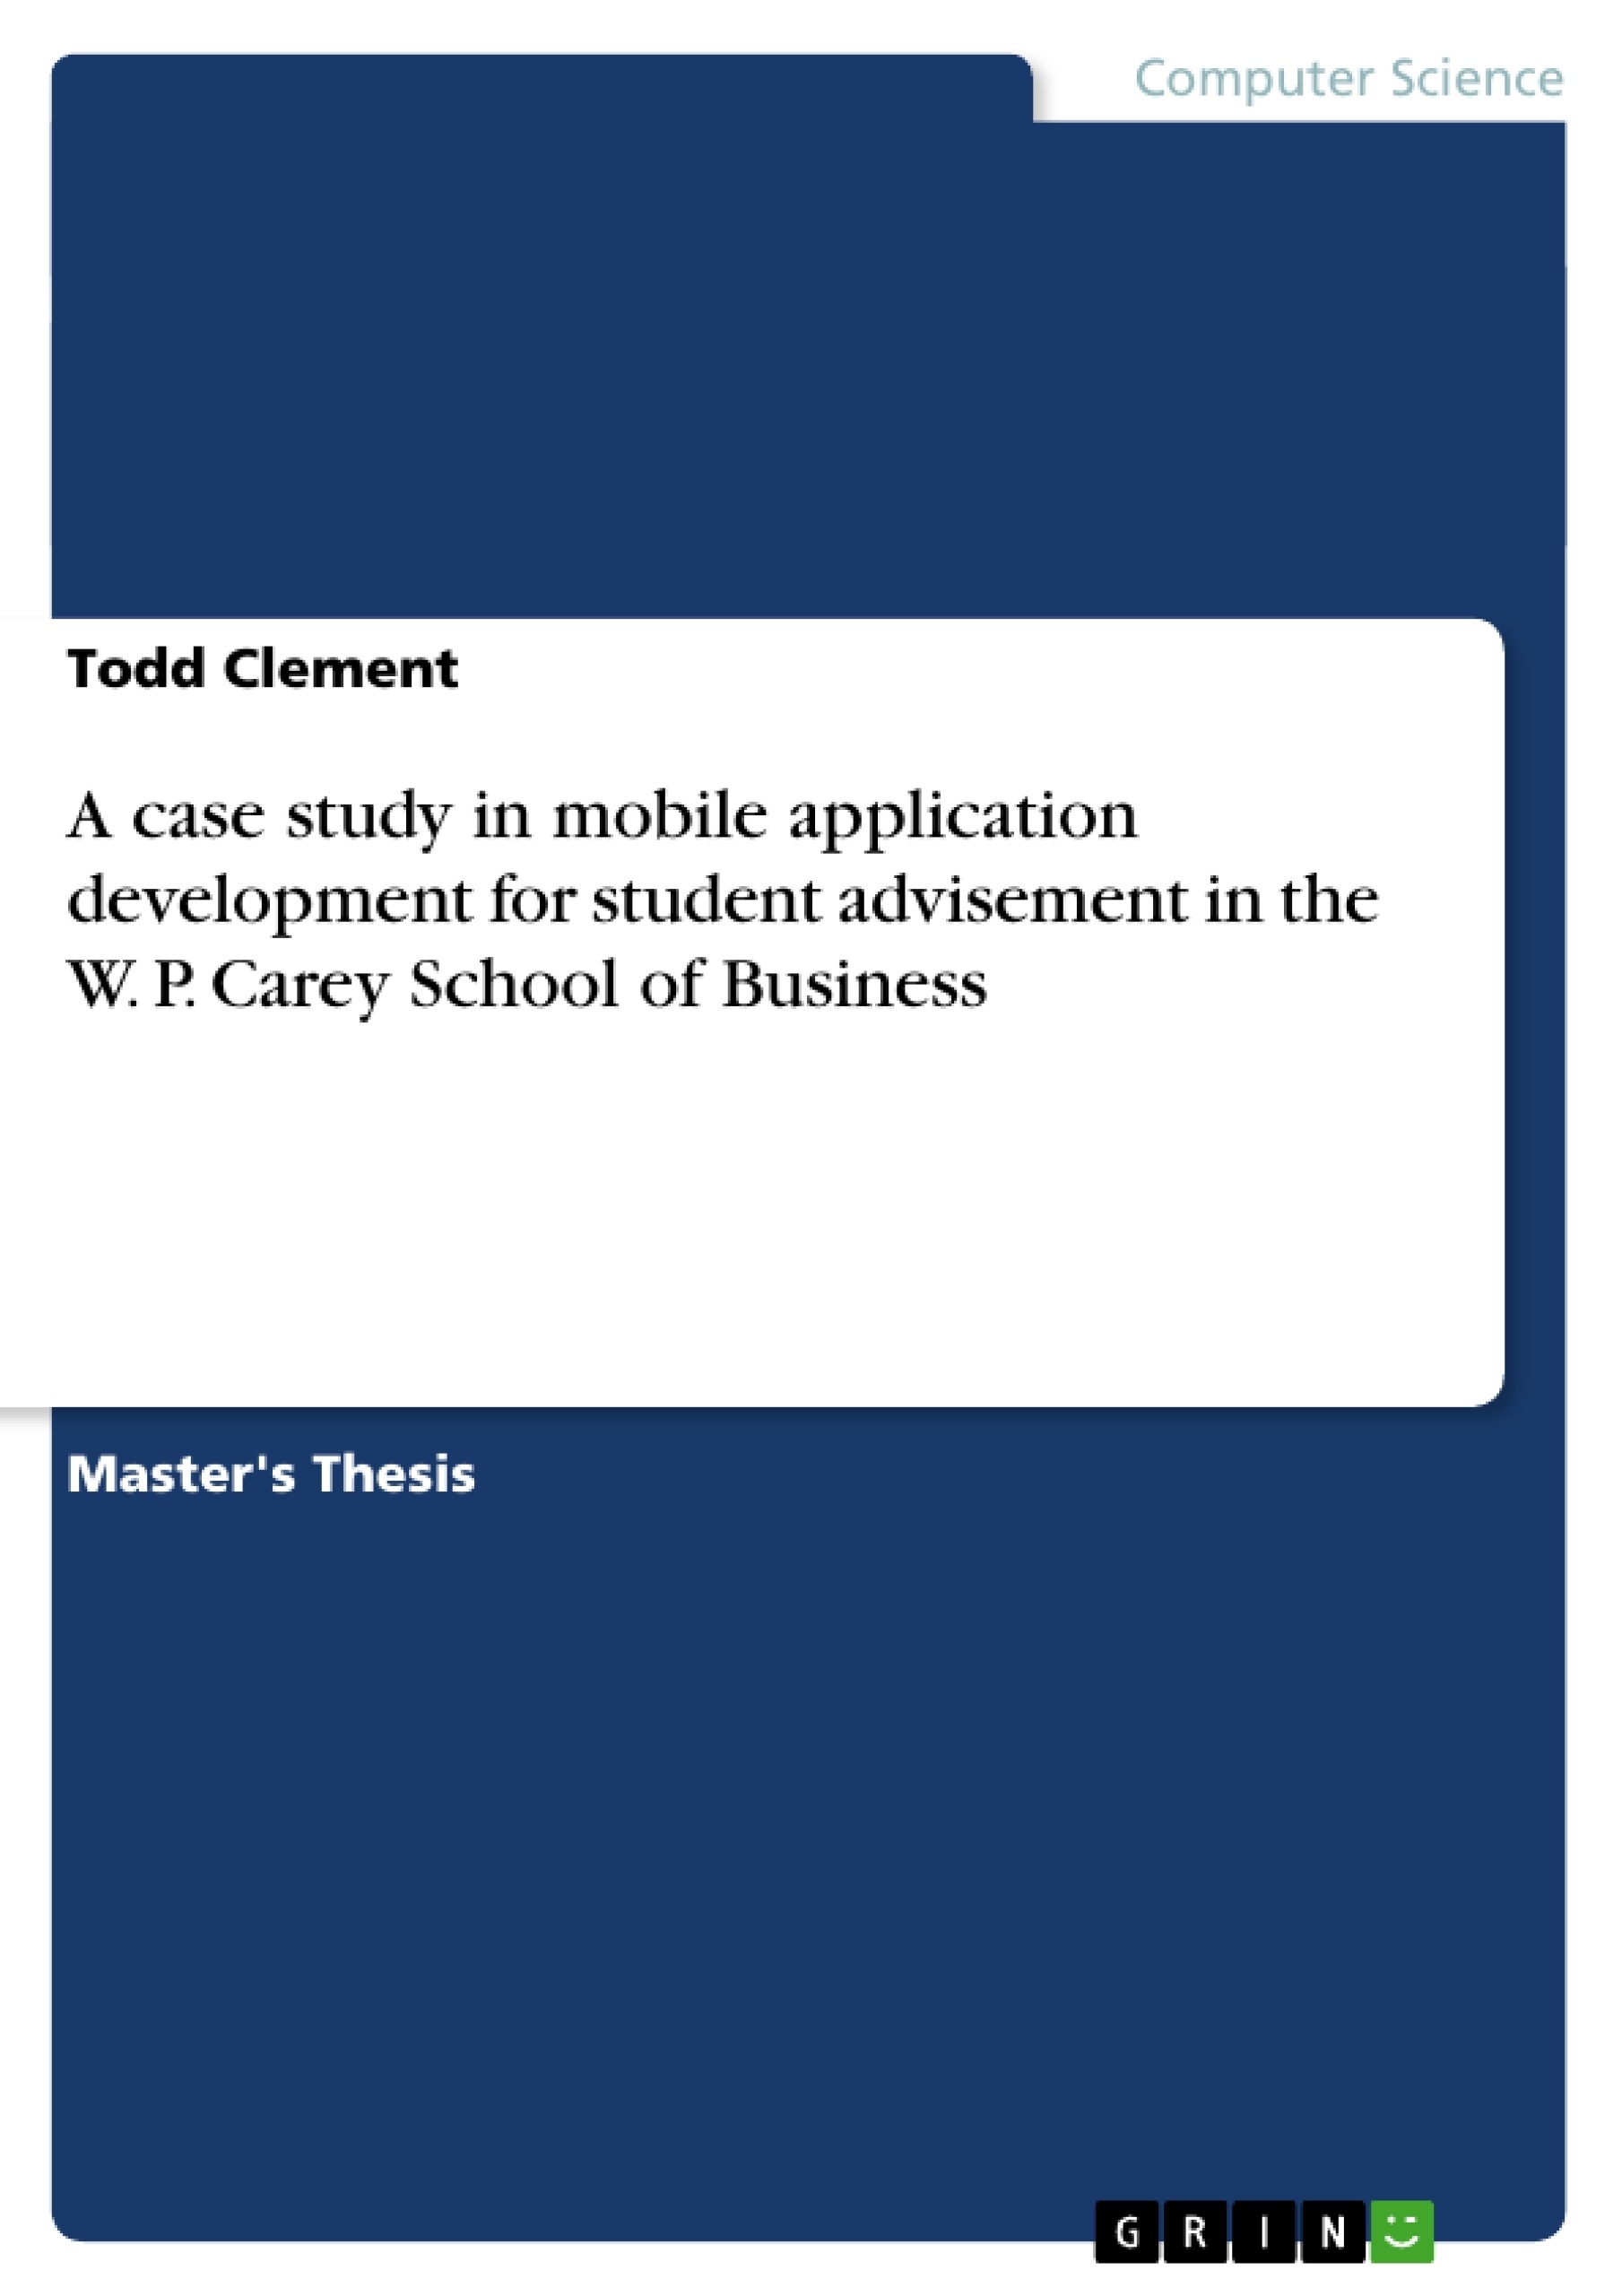 Titre: A case study in mobile application development for student advisement in the W. P. Carey School of Business